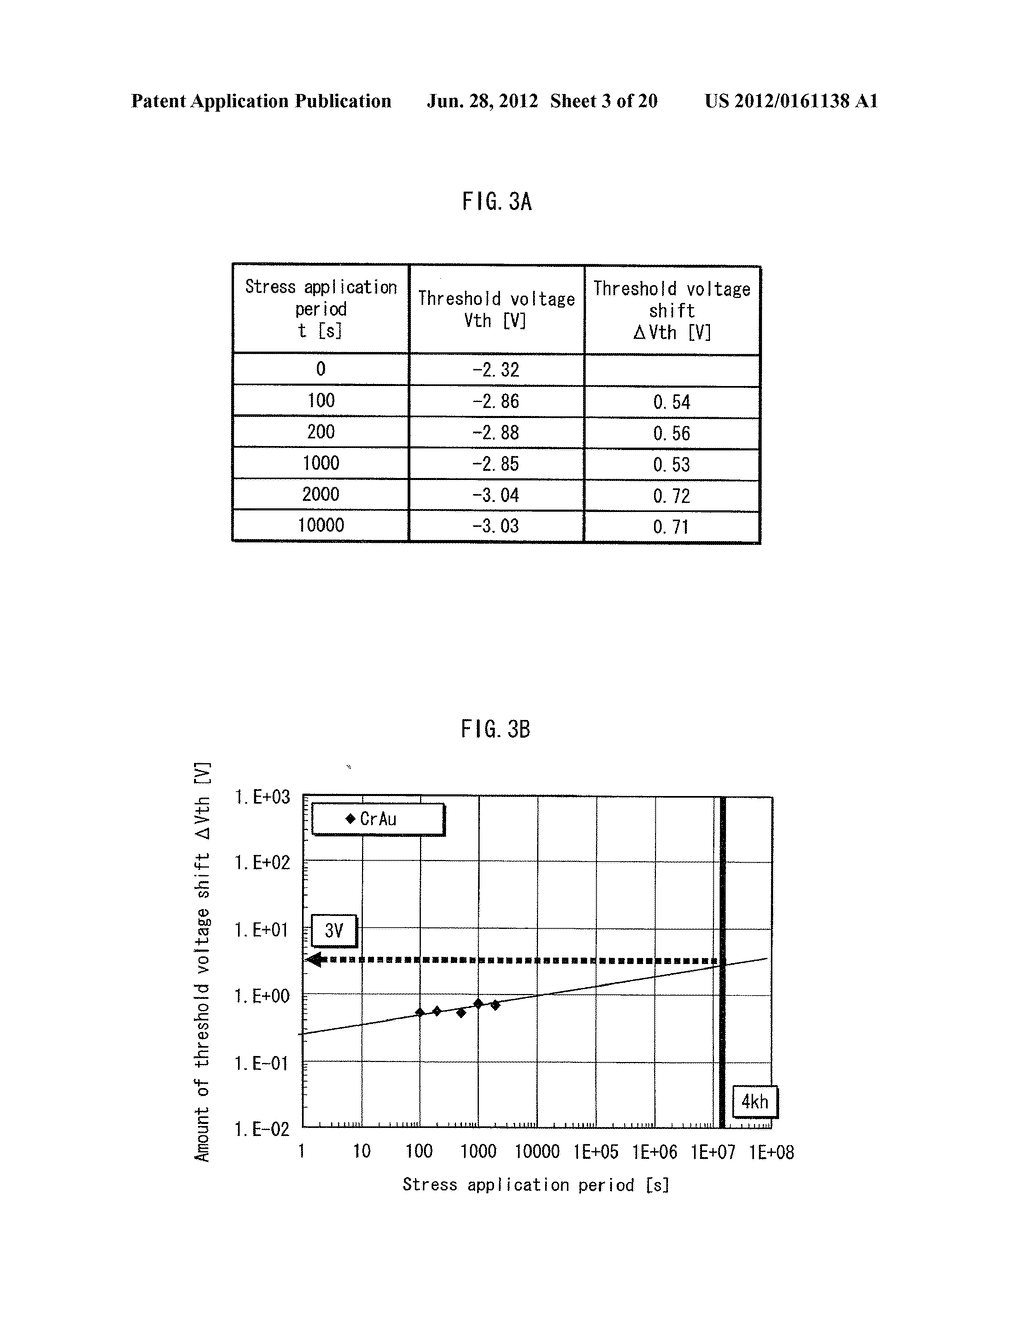 SEMICONDUCTOR TRANSISTOR MANUFACTURING METHOD, DRIVING CIRCUIT UTILIZING A     SEMICONDUCTOR TRANSISTOR MANUFACTURED ACCORDING TO THE SEMICONDUCTOR     TRANSISTOR MANUFACTURING METHOD, PIXEL CIRCUIT INCLUDING THE DRIVING     CIRCUIT AND A DISPLAY ELEMENT, DISPLAY PANEL HAVING THE PIXEL CIRCUITS     DISPOSED IN A MATRIX, DISPLAY APPARATUS PROVIDED WITH THE DISPLAY PANEL - diagram, schematic, and image 04